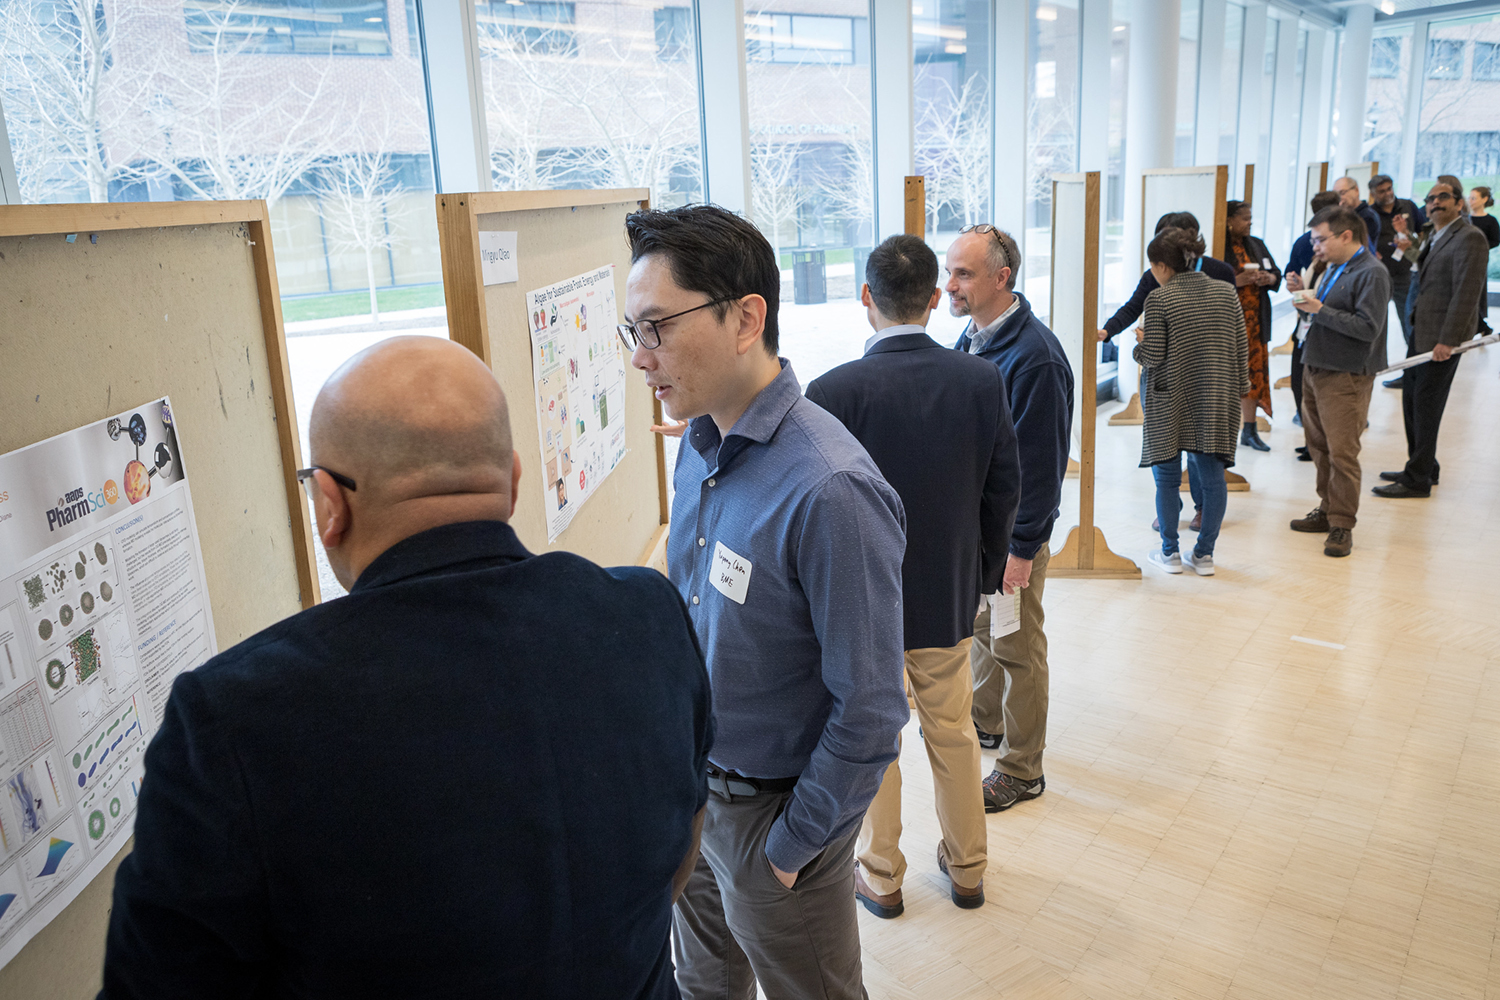 The Collaboratory for Biomedical and Bioengineering Innovation opened April 2 with a symposium and poster session.